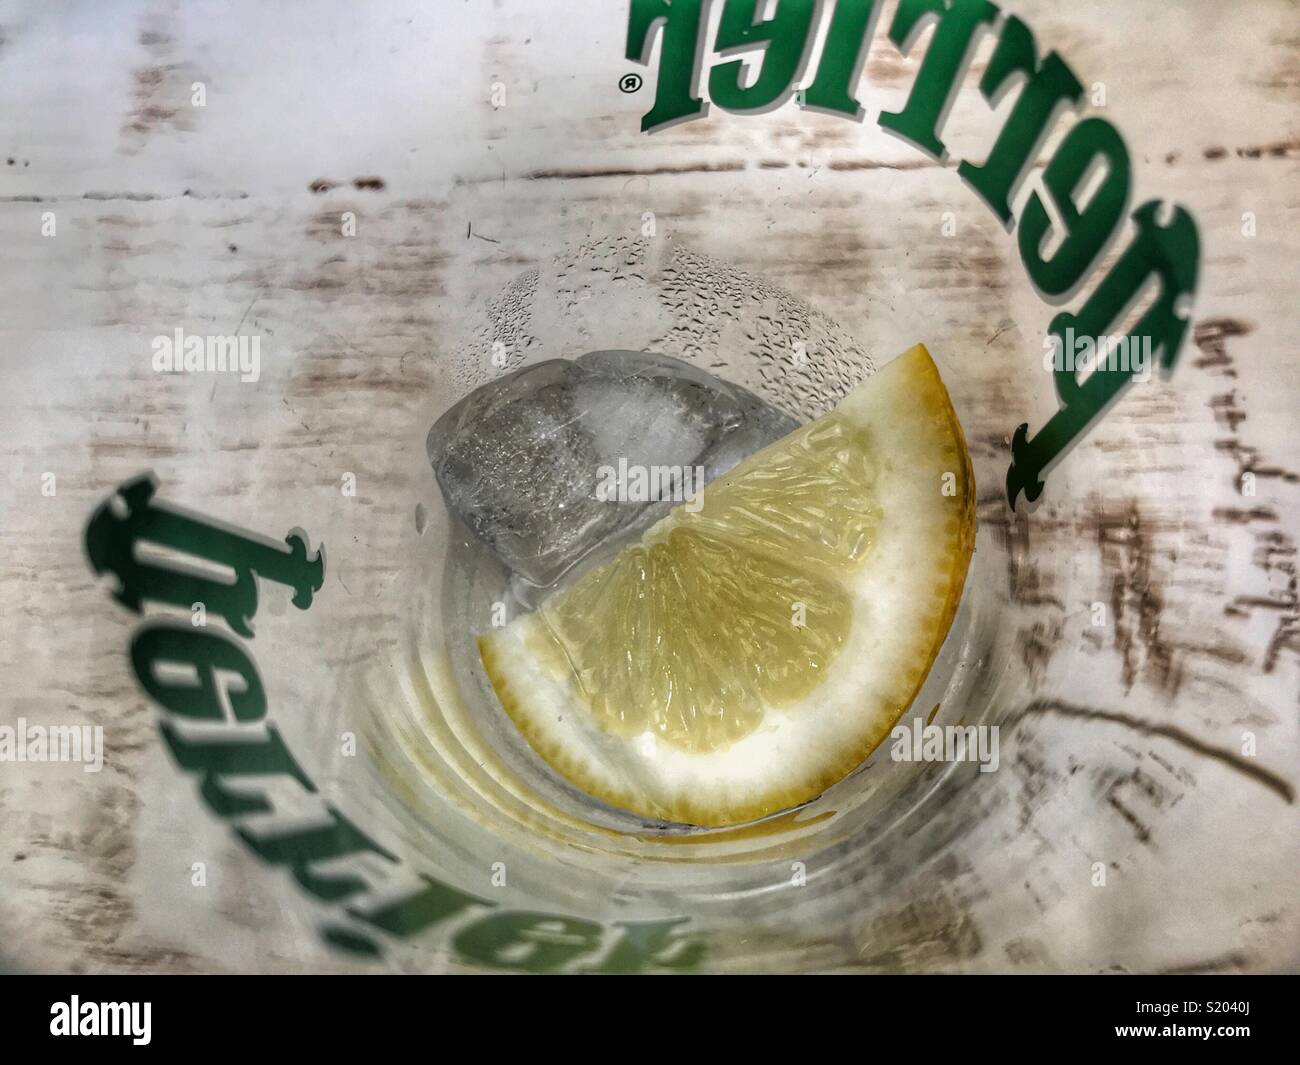 Glass of Perrier water with ice and a slice in a branded glass, high angle view Stock Photo